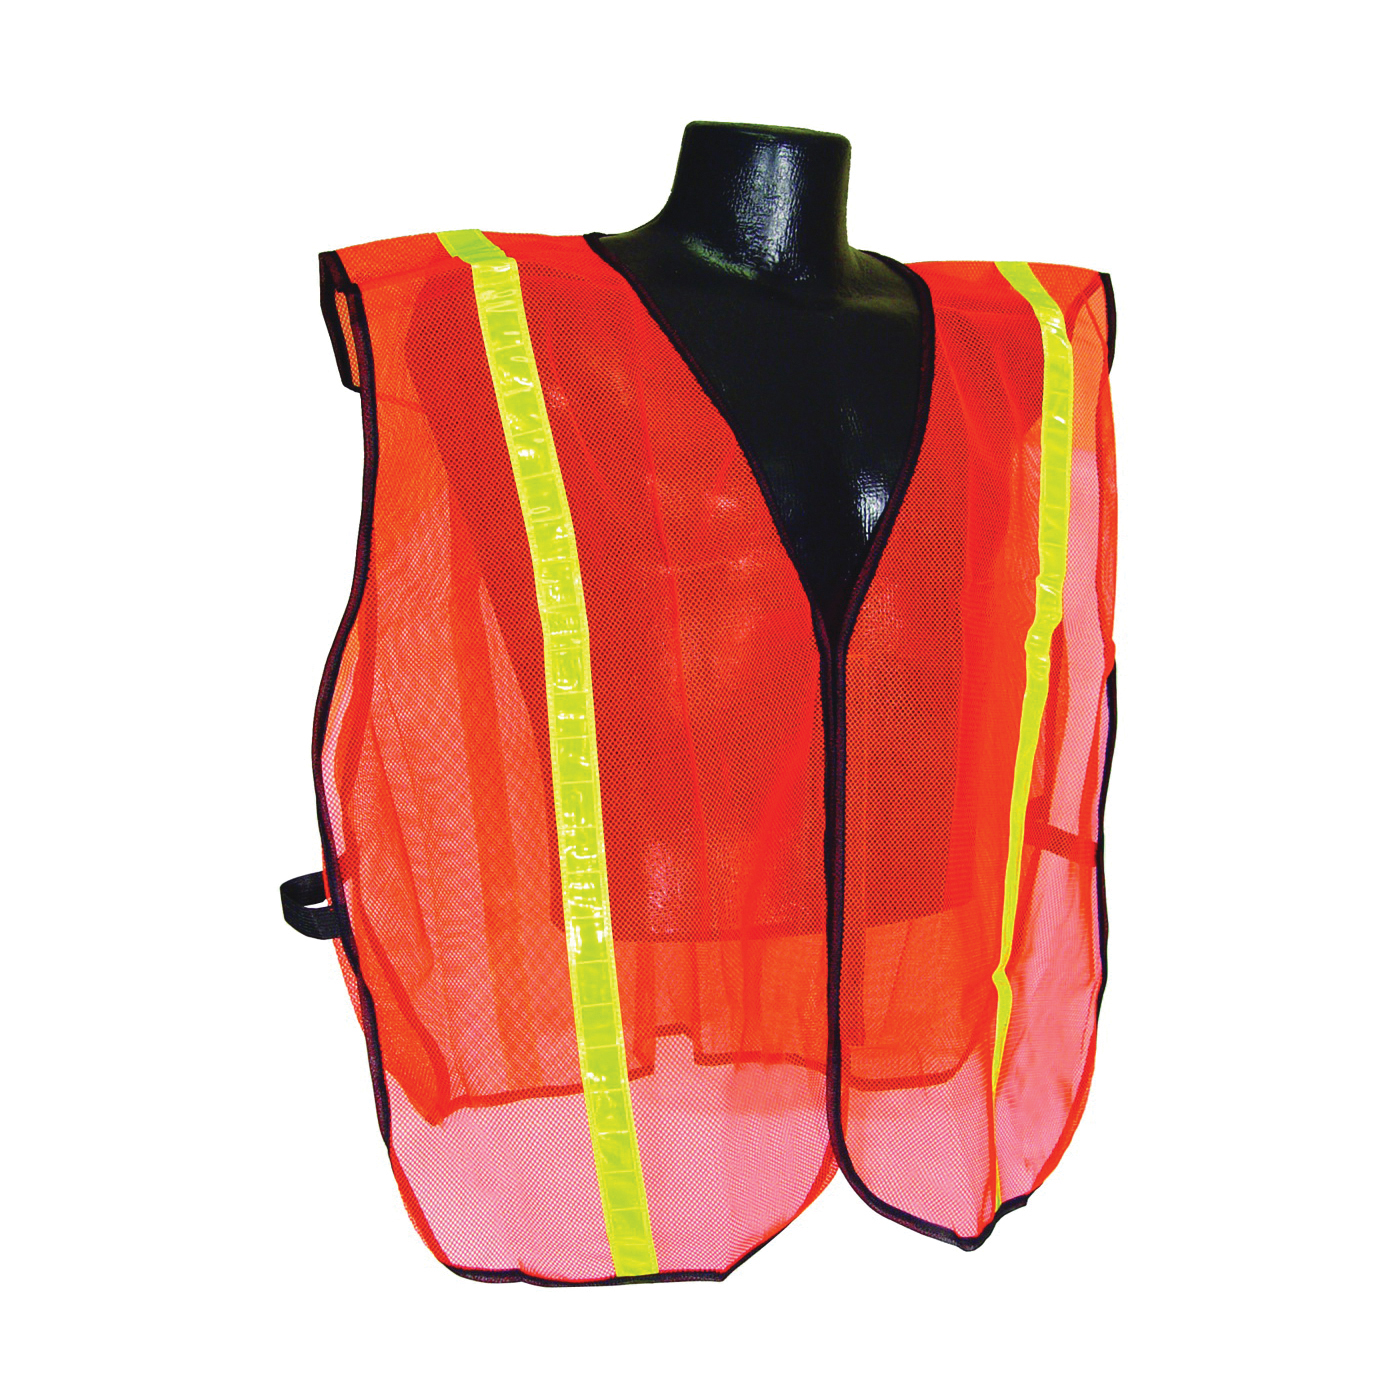 SVO1-S/XL Non-Rated Safety Vest, S/XL, Polyester, Green/Orange/Silver, Hook-and-Loop Closure